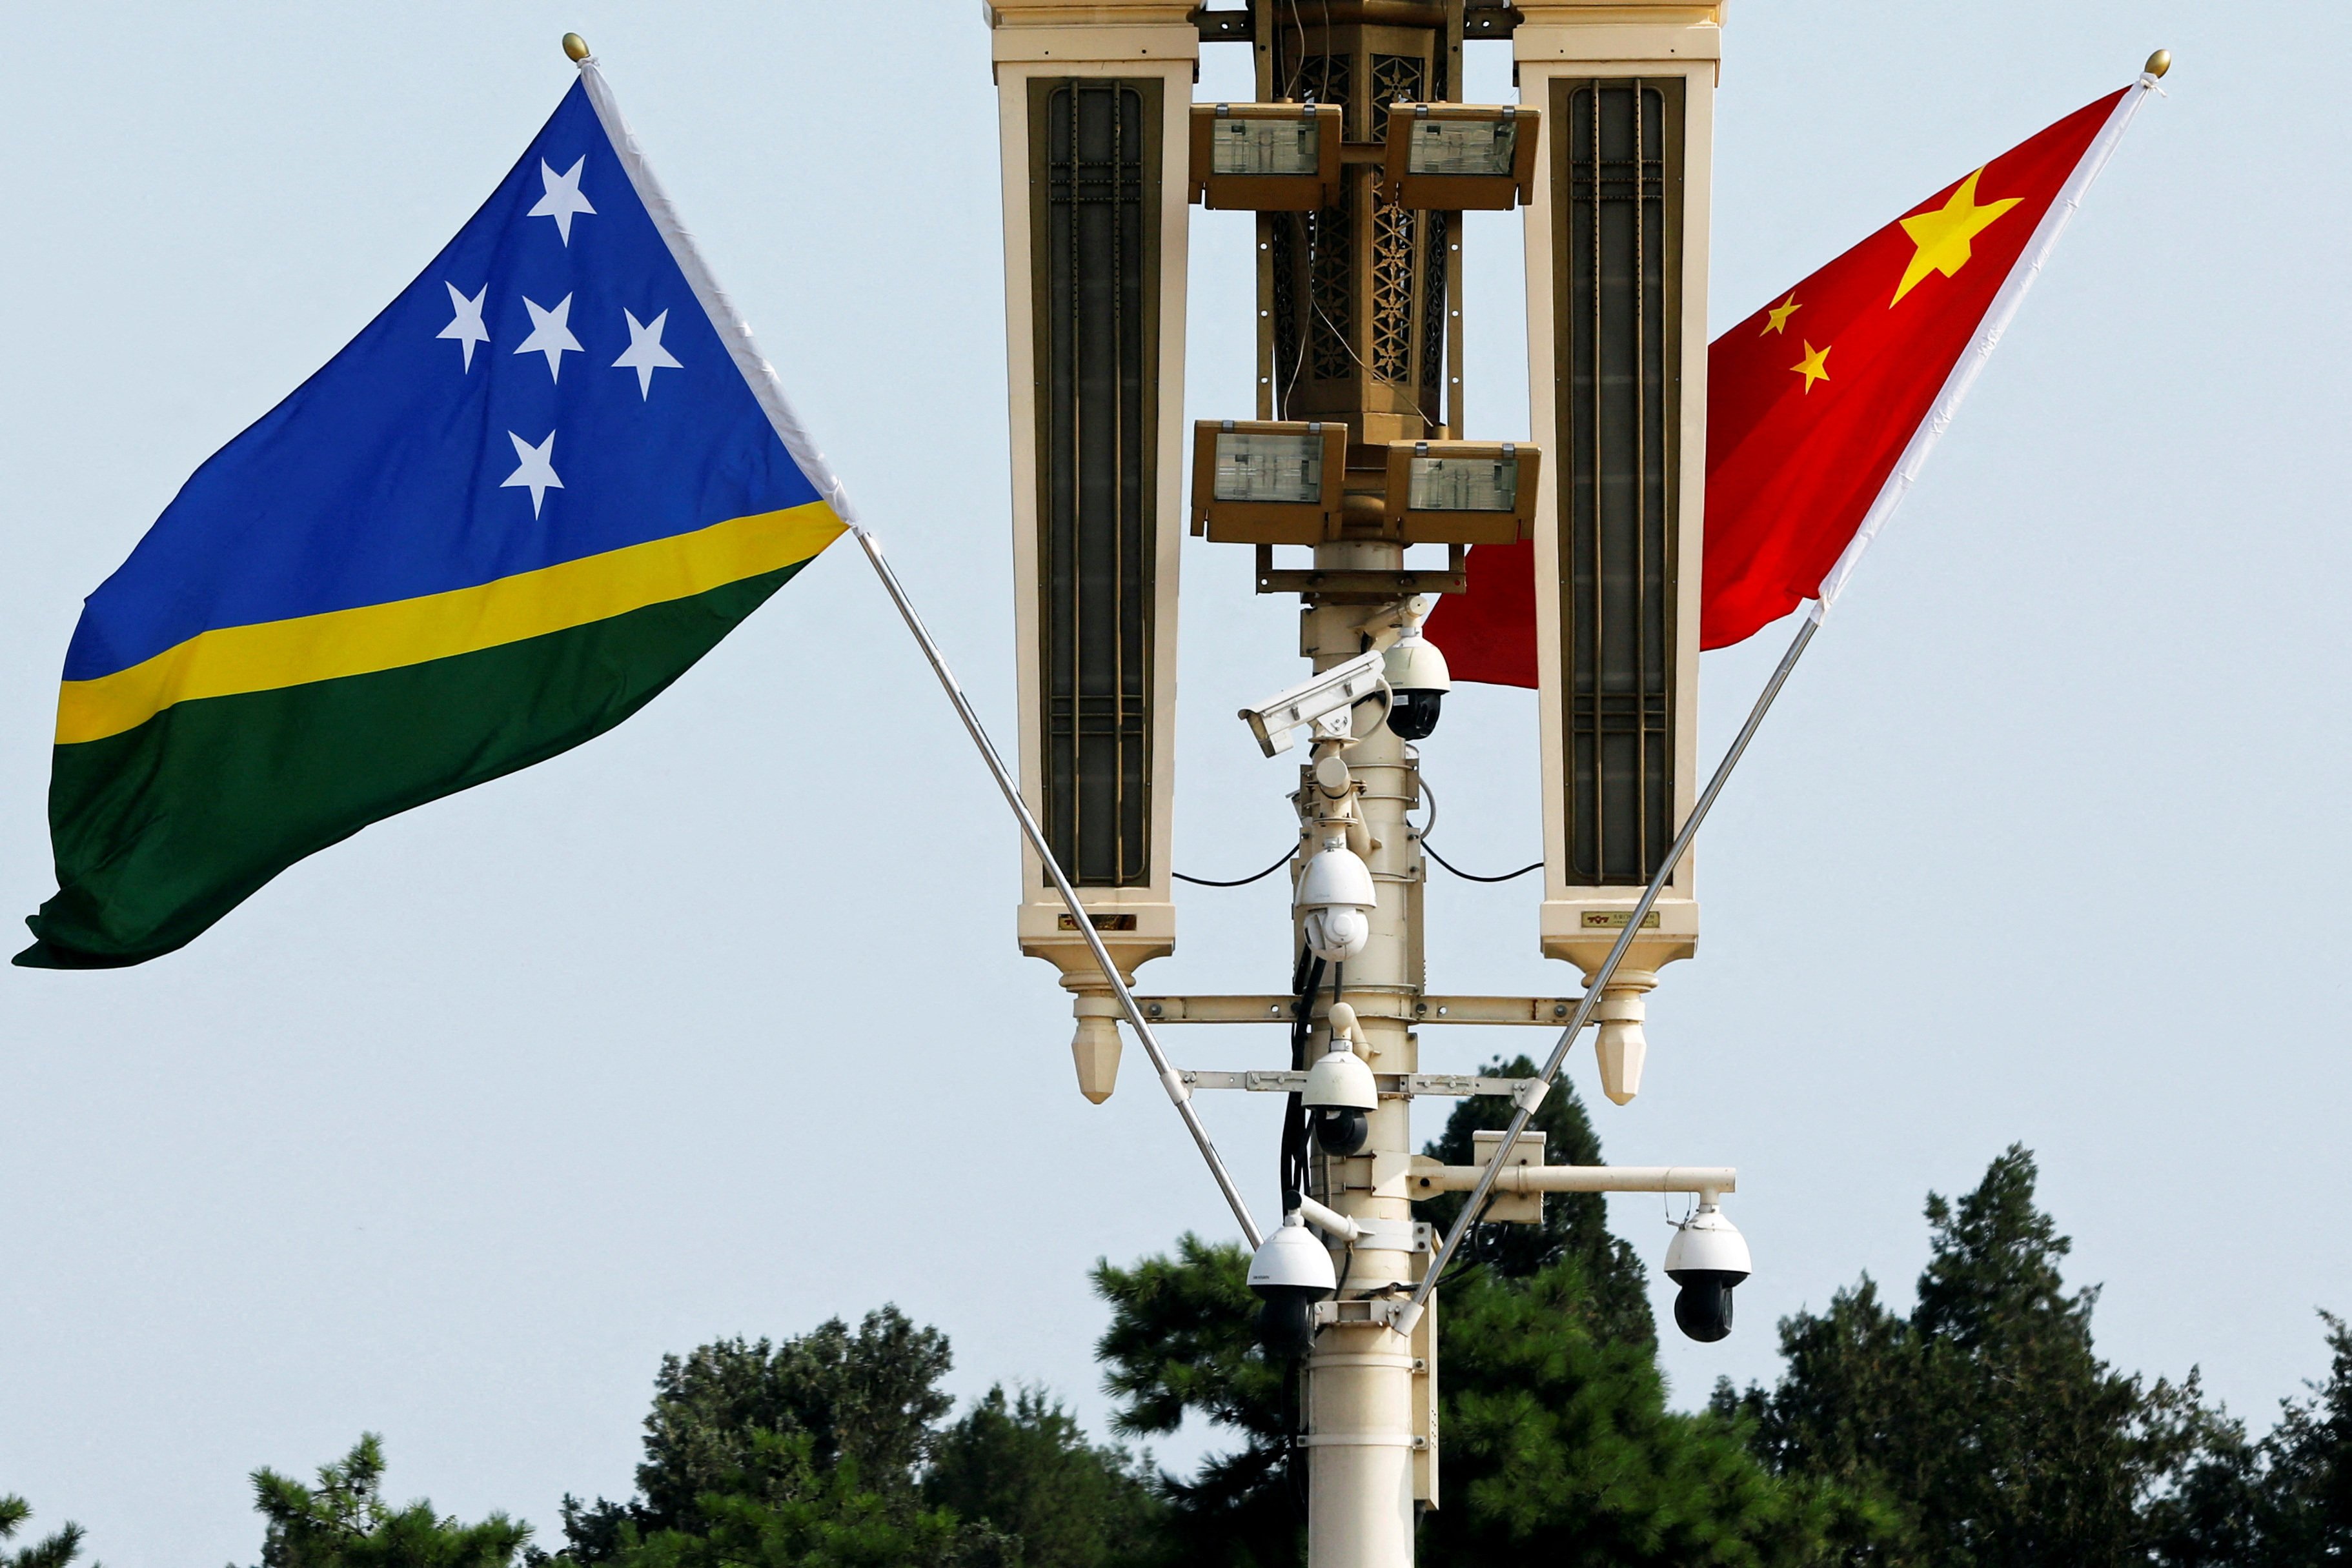 Flags of Solomon Islands and China flutter near Tiananmen square in Beijing, China. Photo: Reuters/File